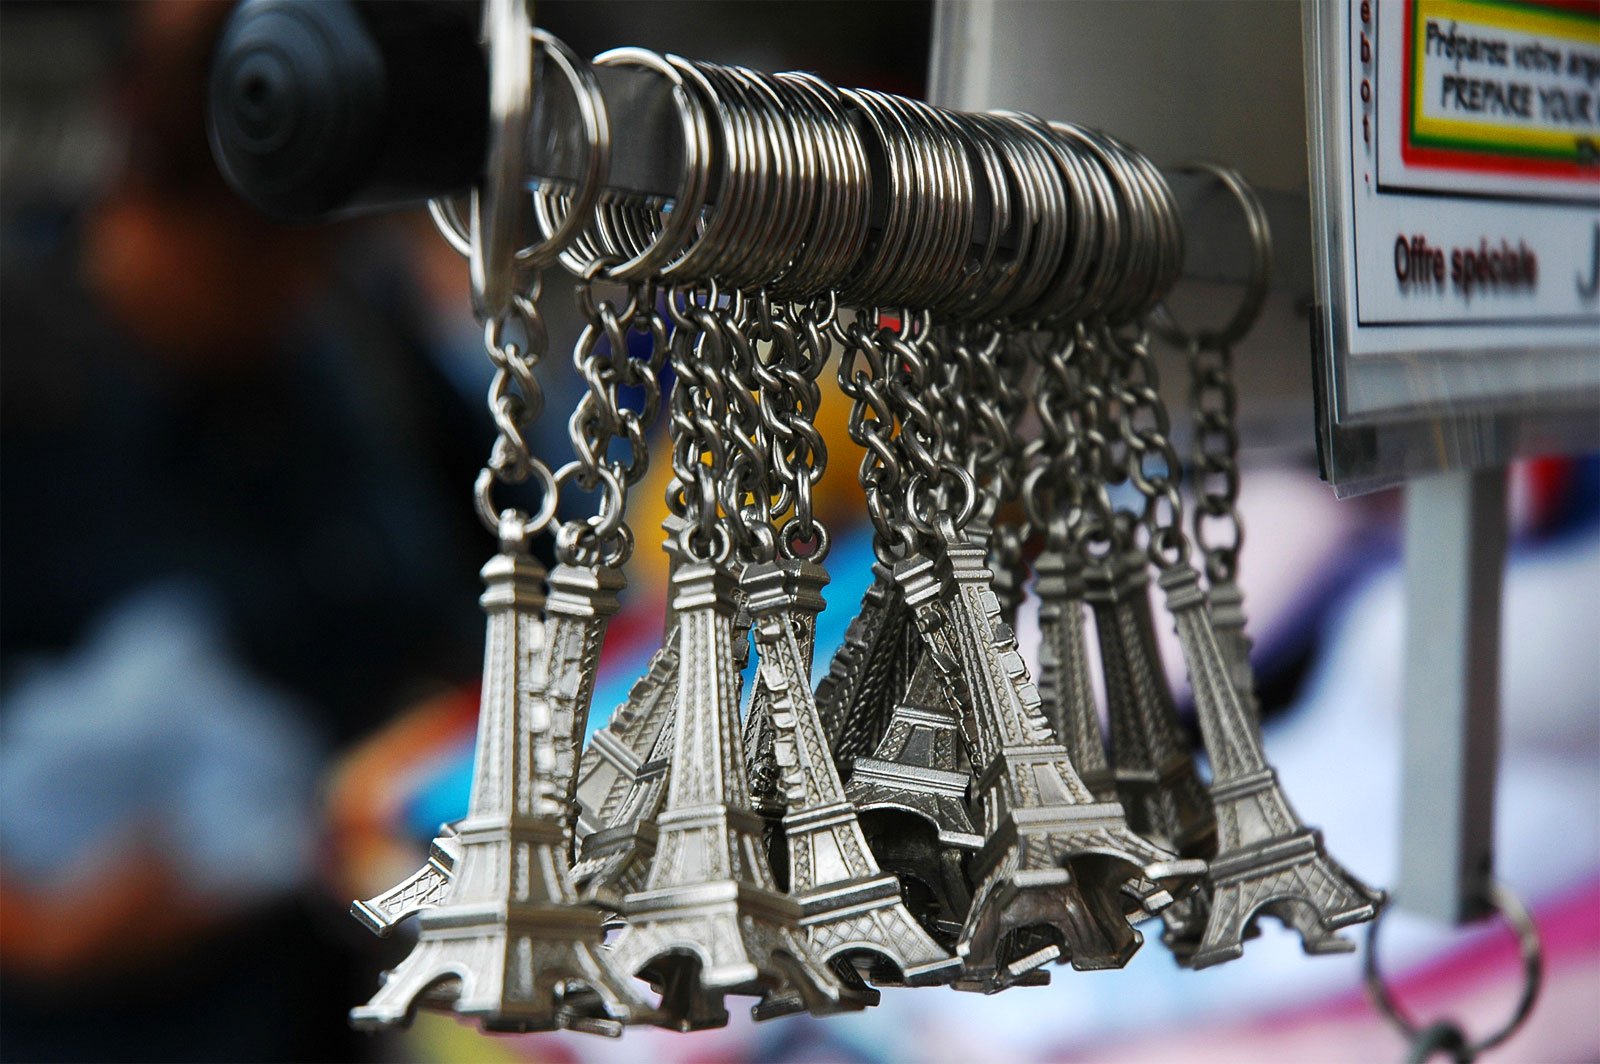 How to buy keychain-tower in Paris